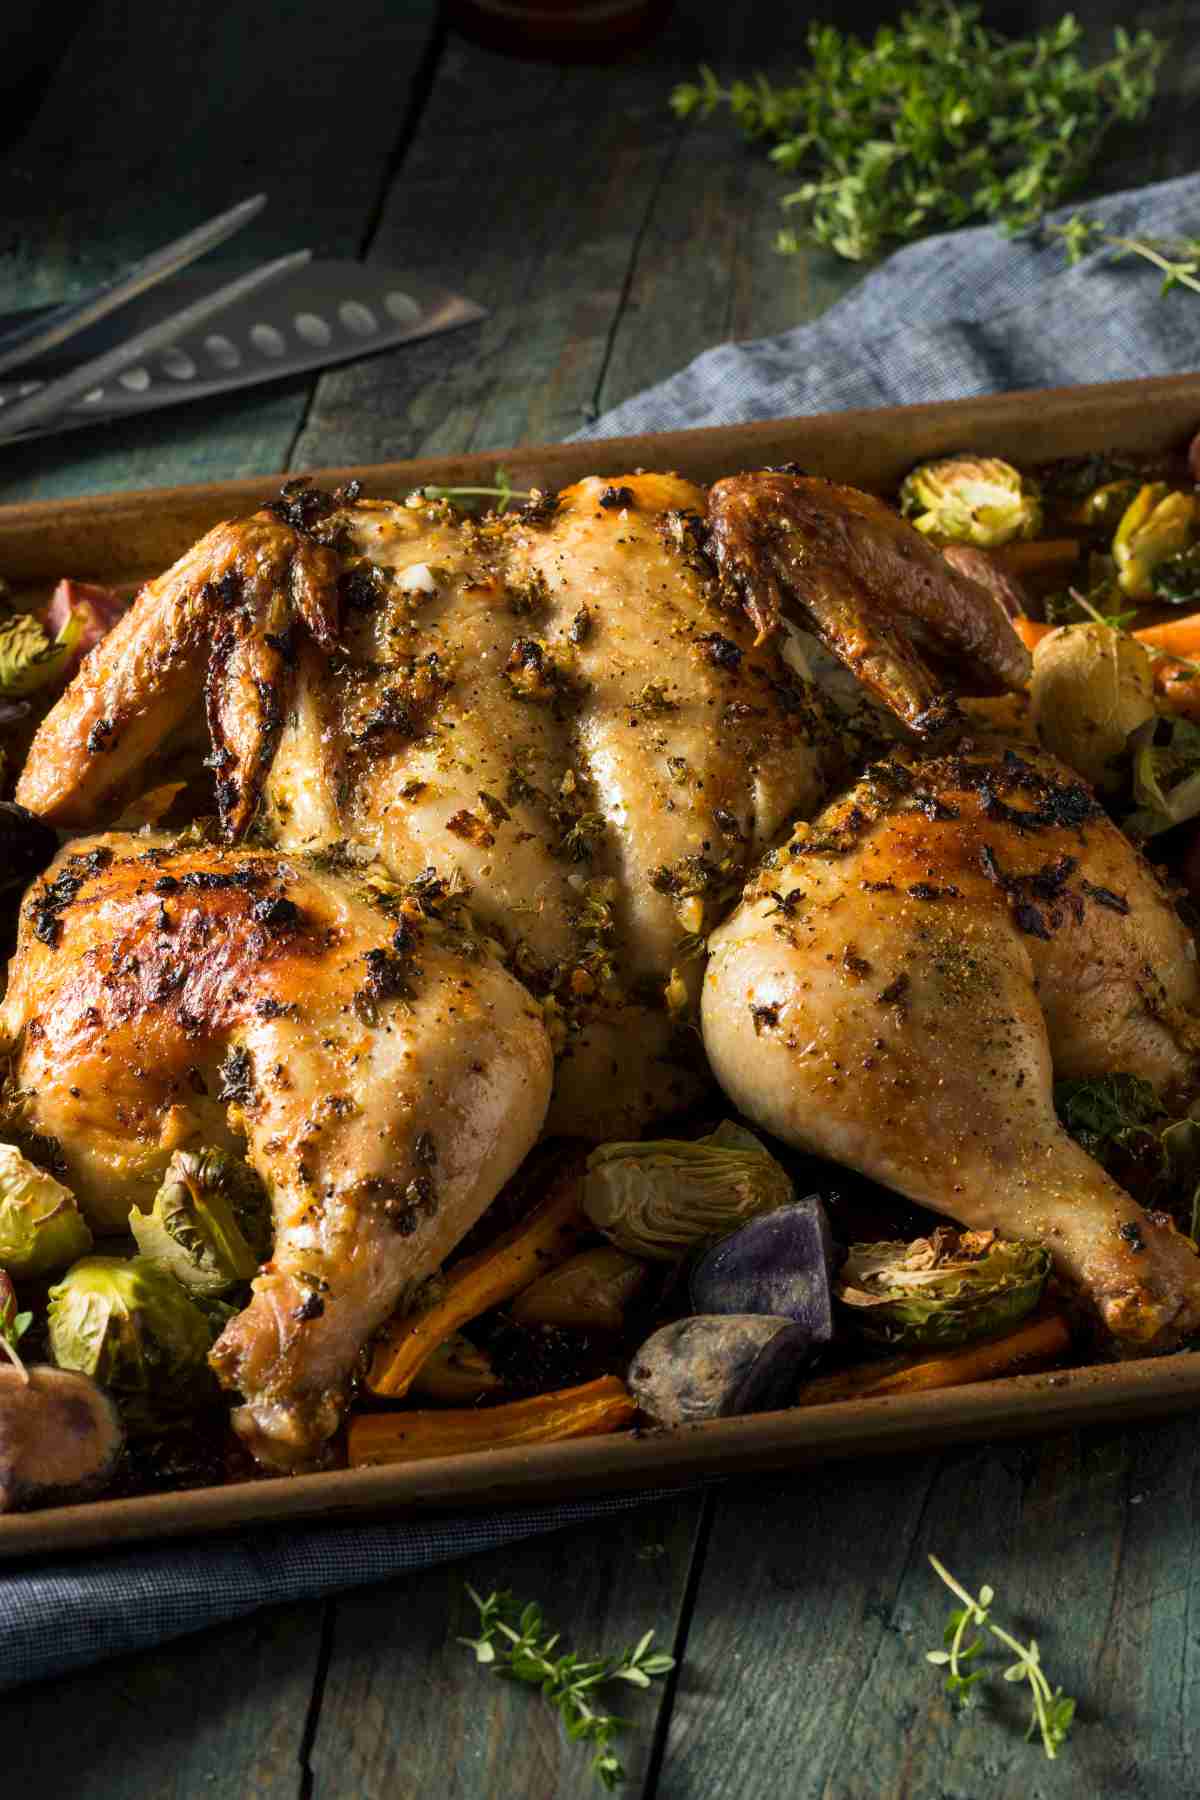 You want your chicken to be tender and delicious but it also has to be cooked thoroughly. Not sure what the right internal temperature of cooked chicken should be? Read on to find out more about the safest temperature for various cuts of lean and tasty chicken meals.